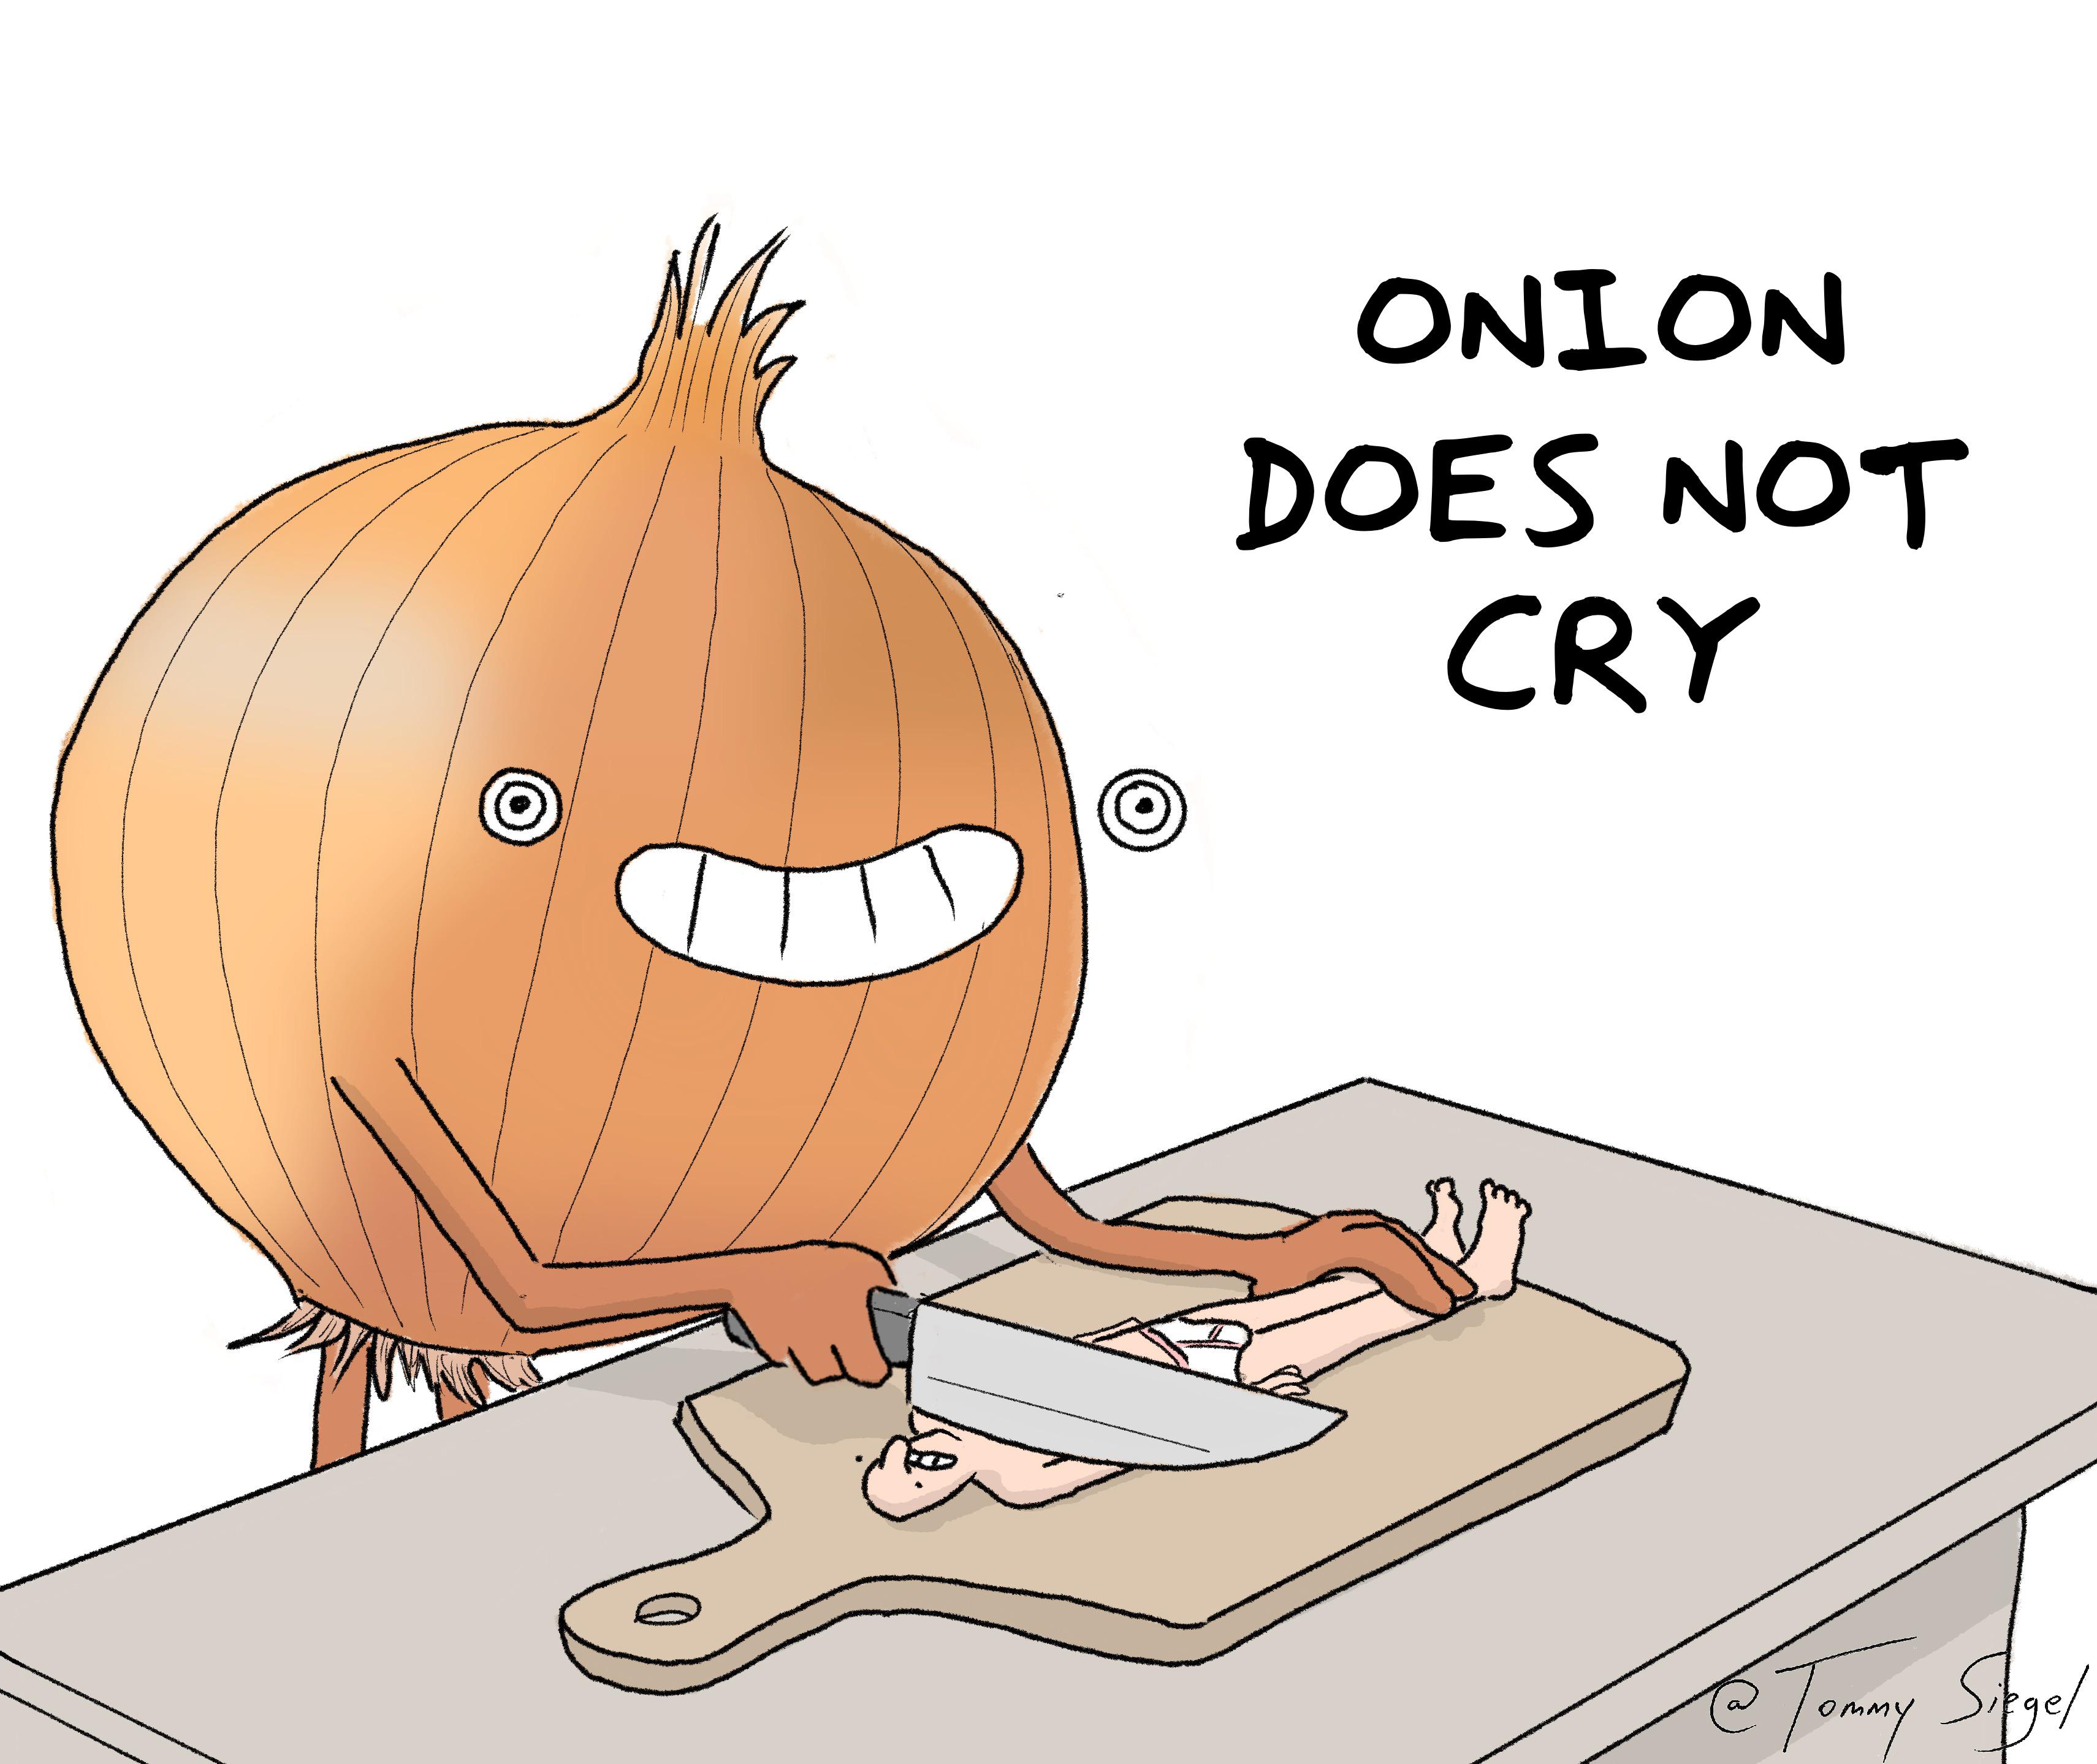 does the onion cry?